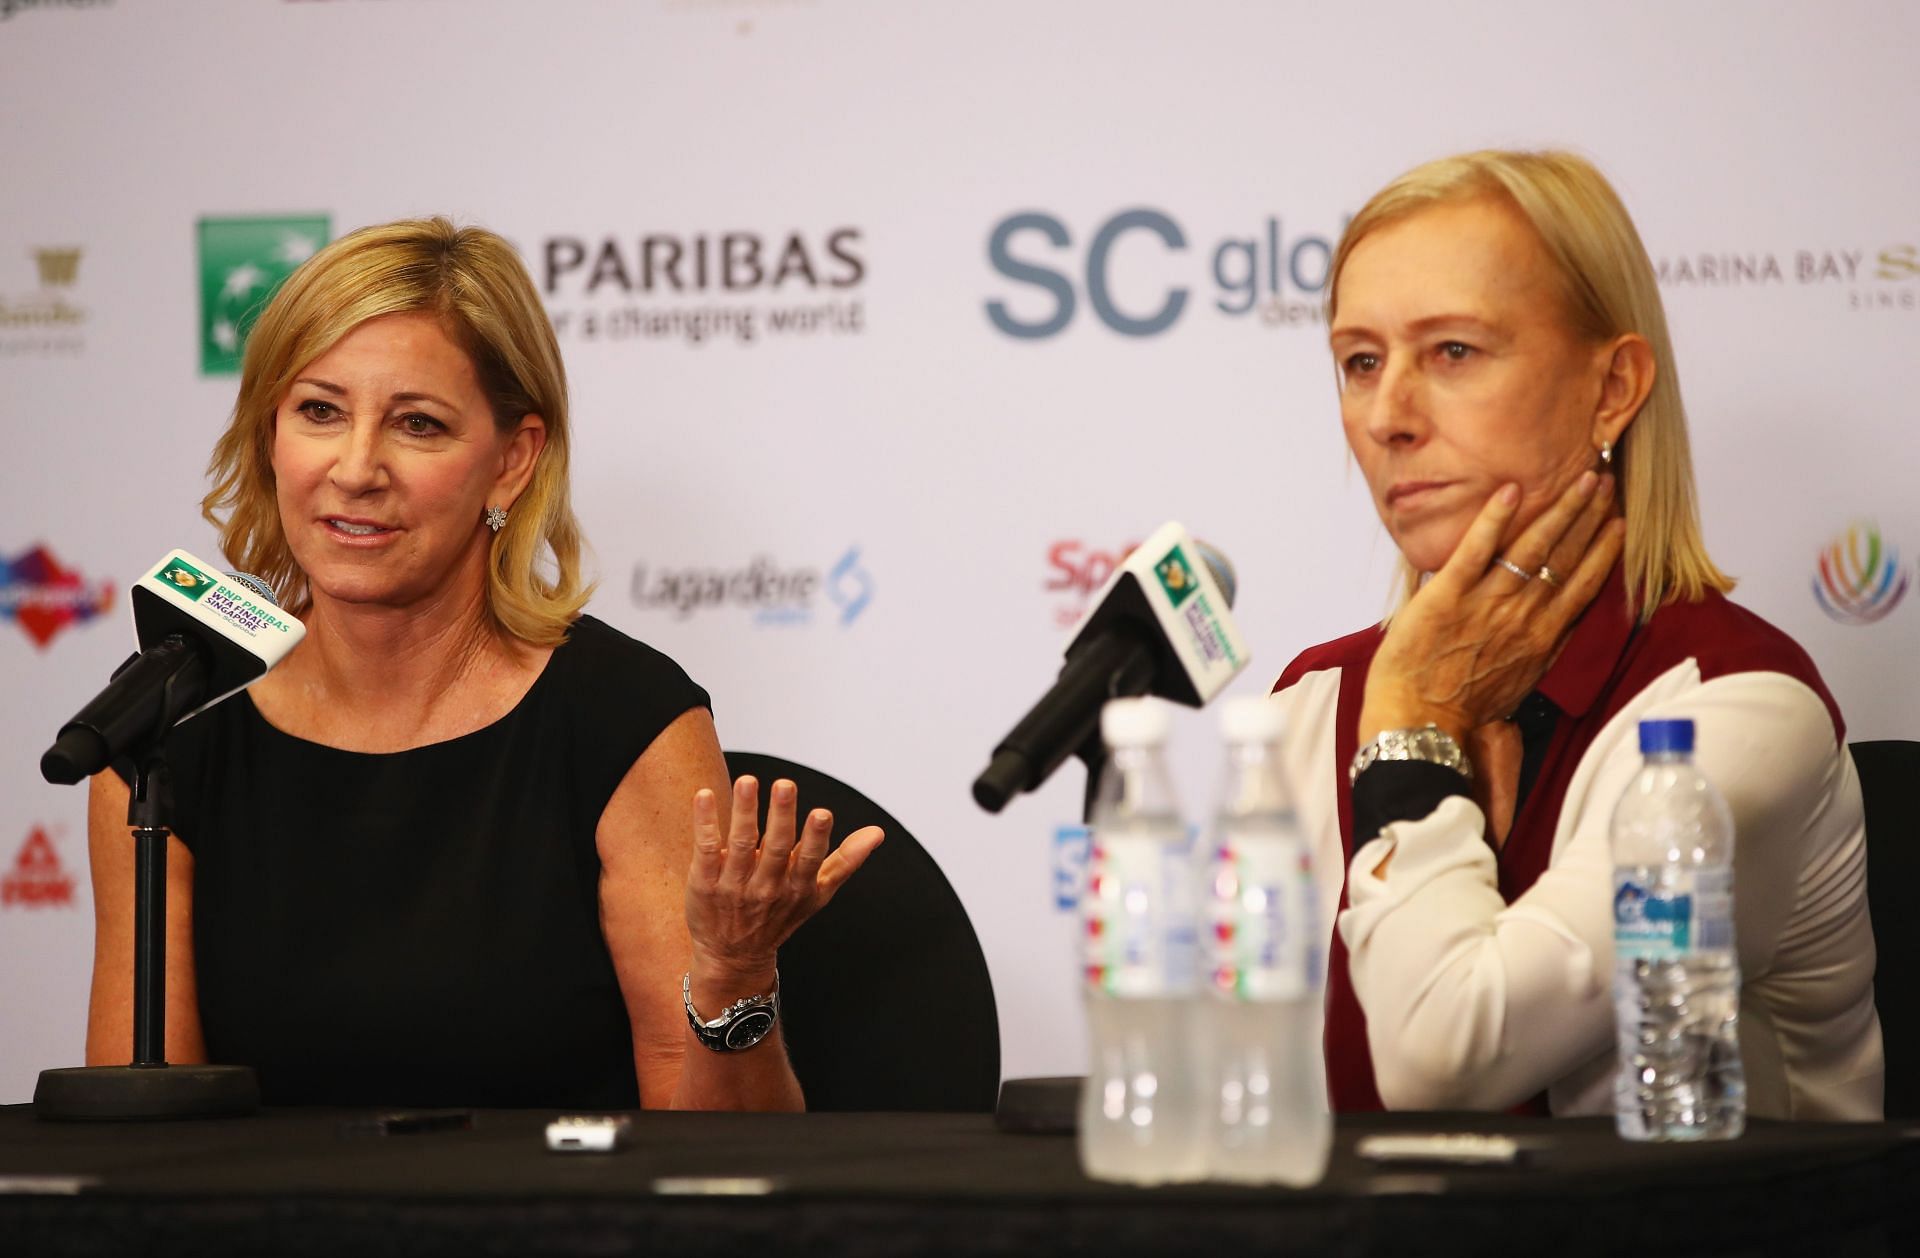 Martina Navratilova and Chris Evert pictured during a press conference.